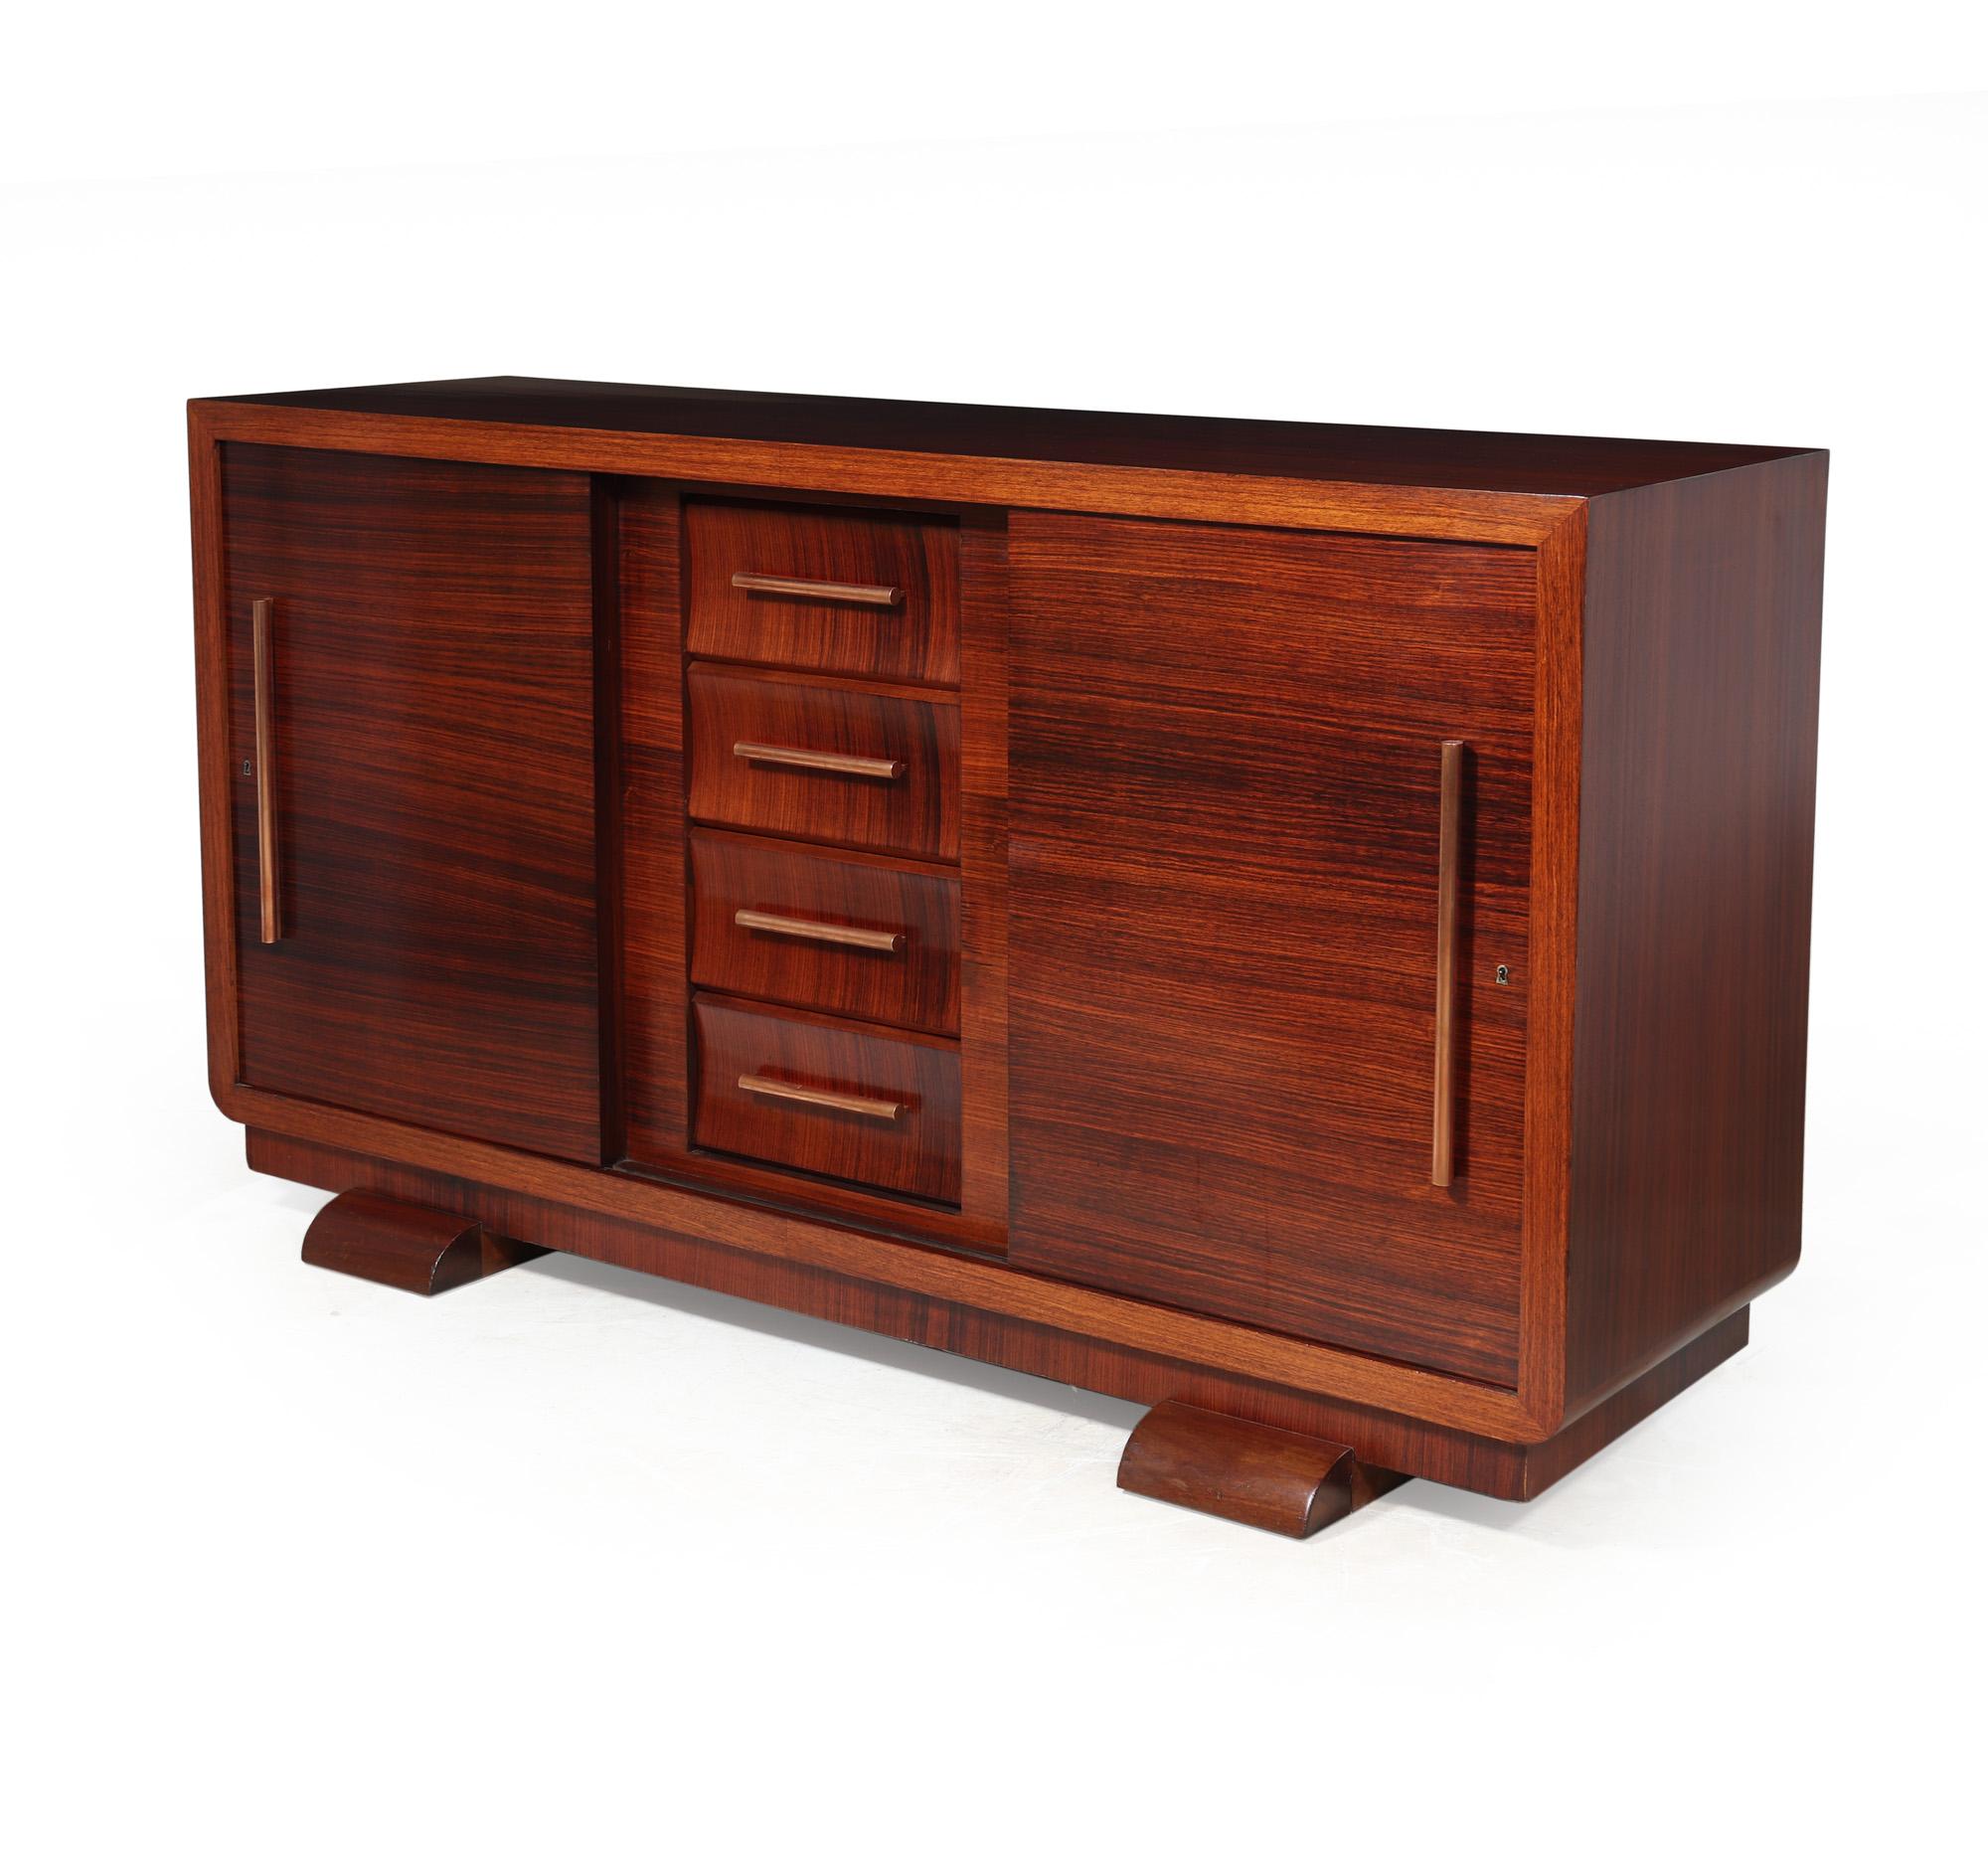 FRENCH ART DECO SIDEBOARD 
An Art Deco sideboard with two sliding doors and four central concave drawers with copper handles standing on sled feet, behind are adjustable height shelves in either side, the sideboard has been fully polished and is in